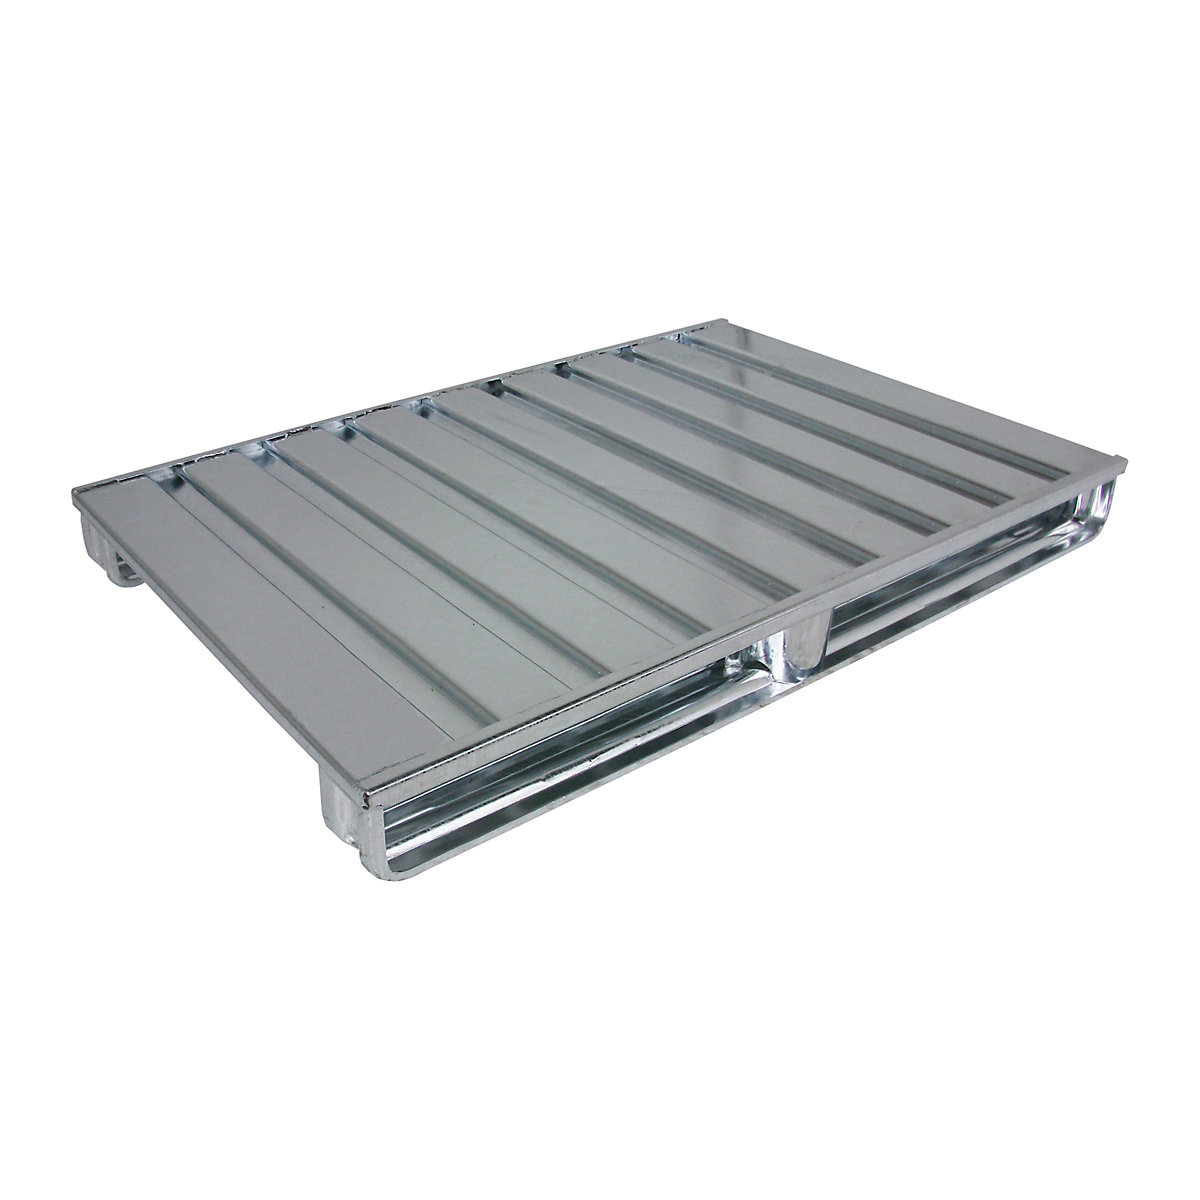 Flat steel pallet – Heson, LxW 1200 x 1000 mm, max. load 1500 kg, zinc plated-4